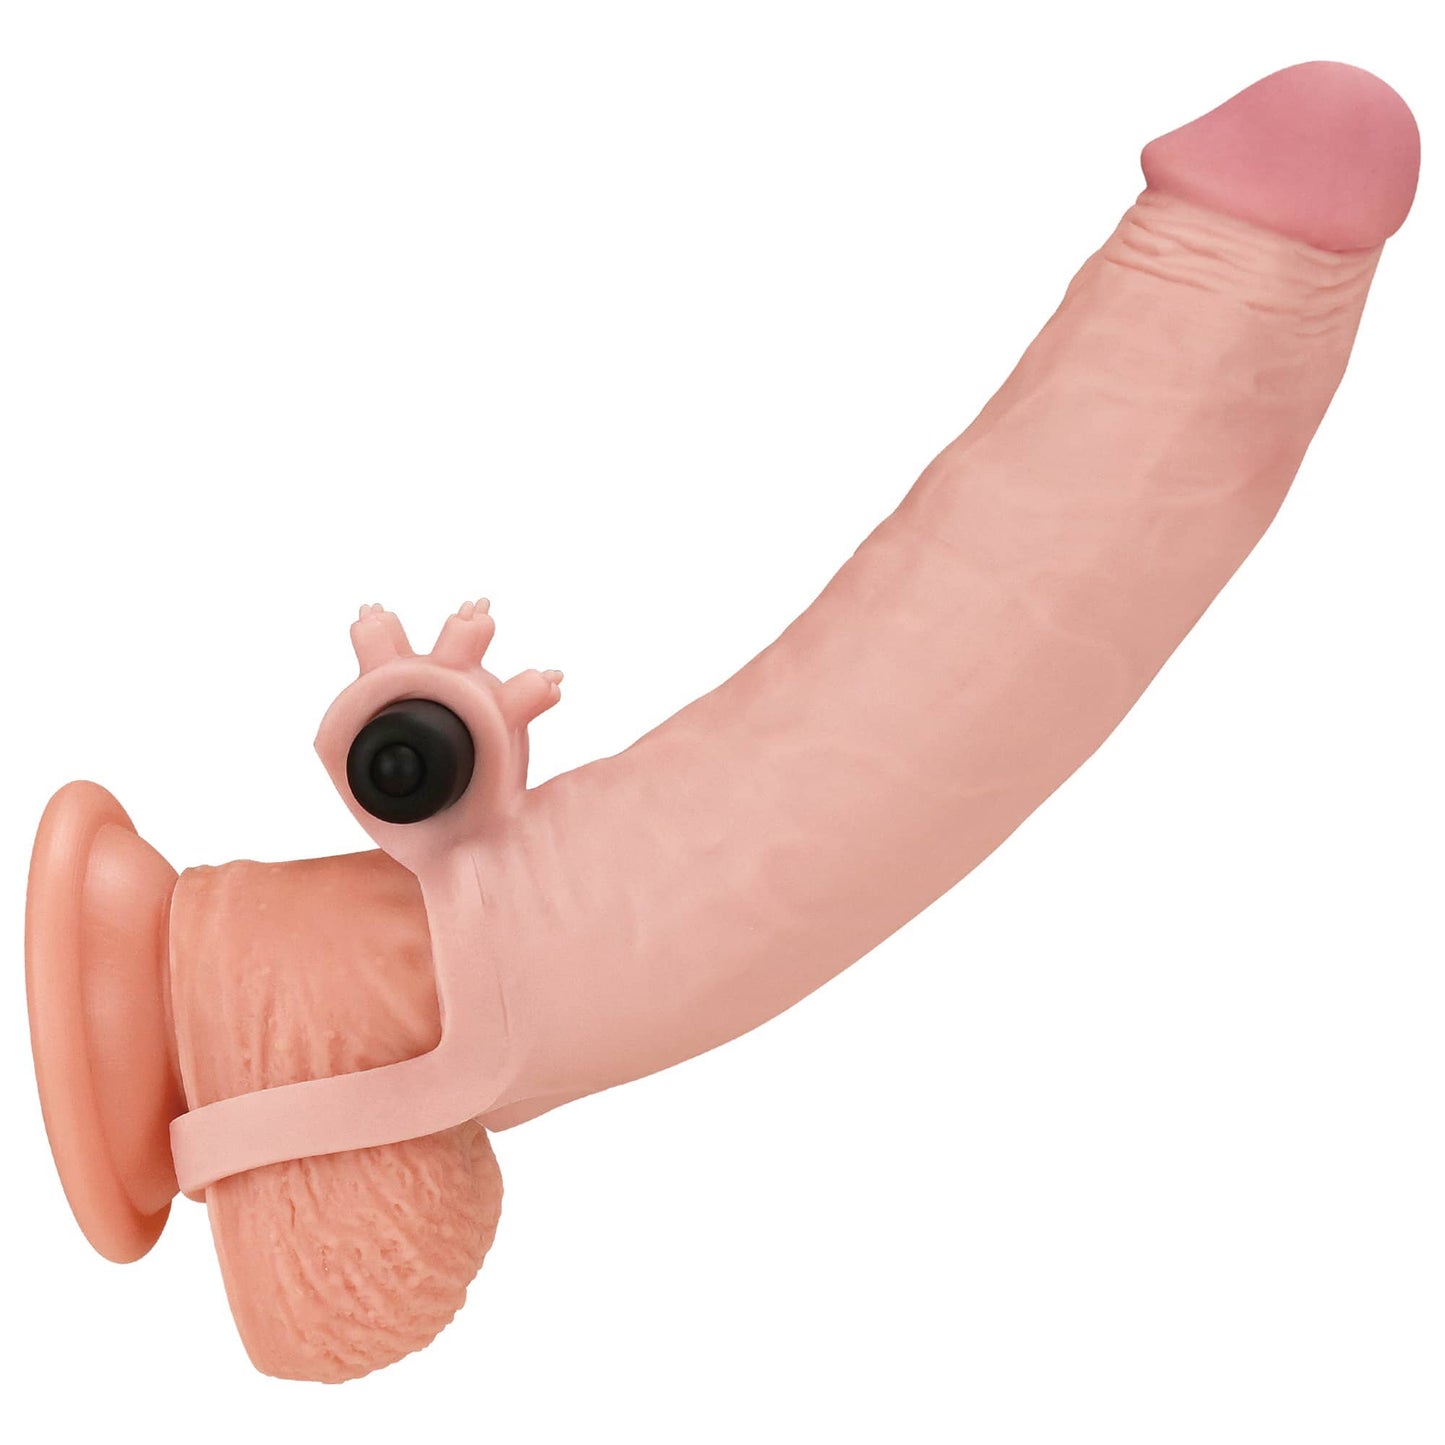 The 7.5 inches dildo extender with bullet vibrator worn on dildo